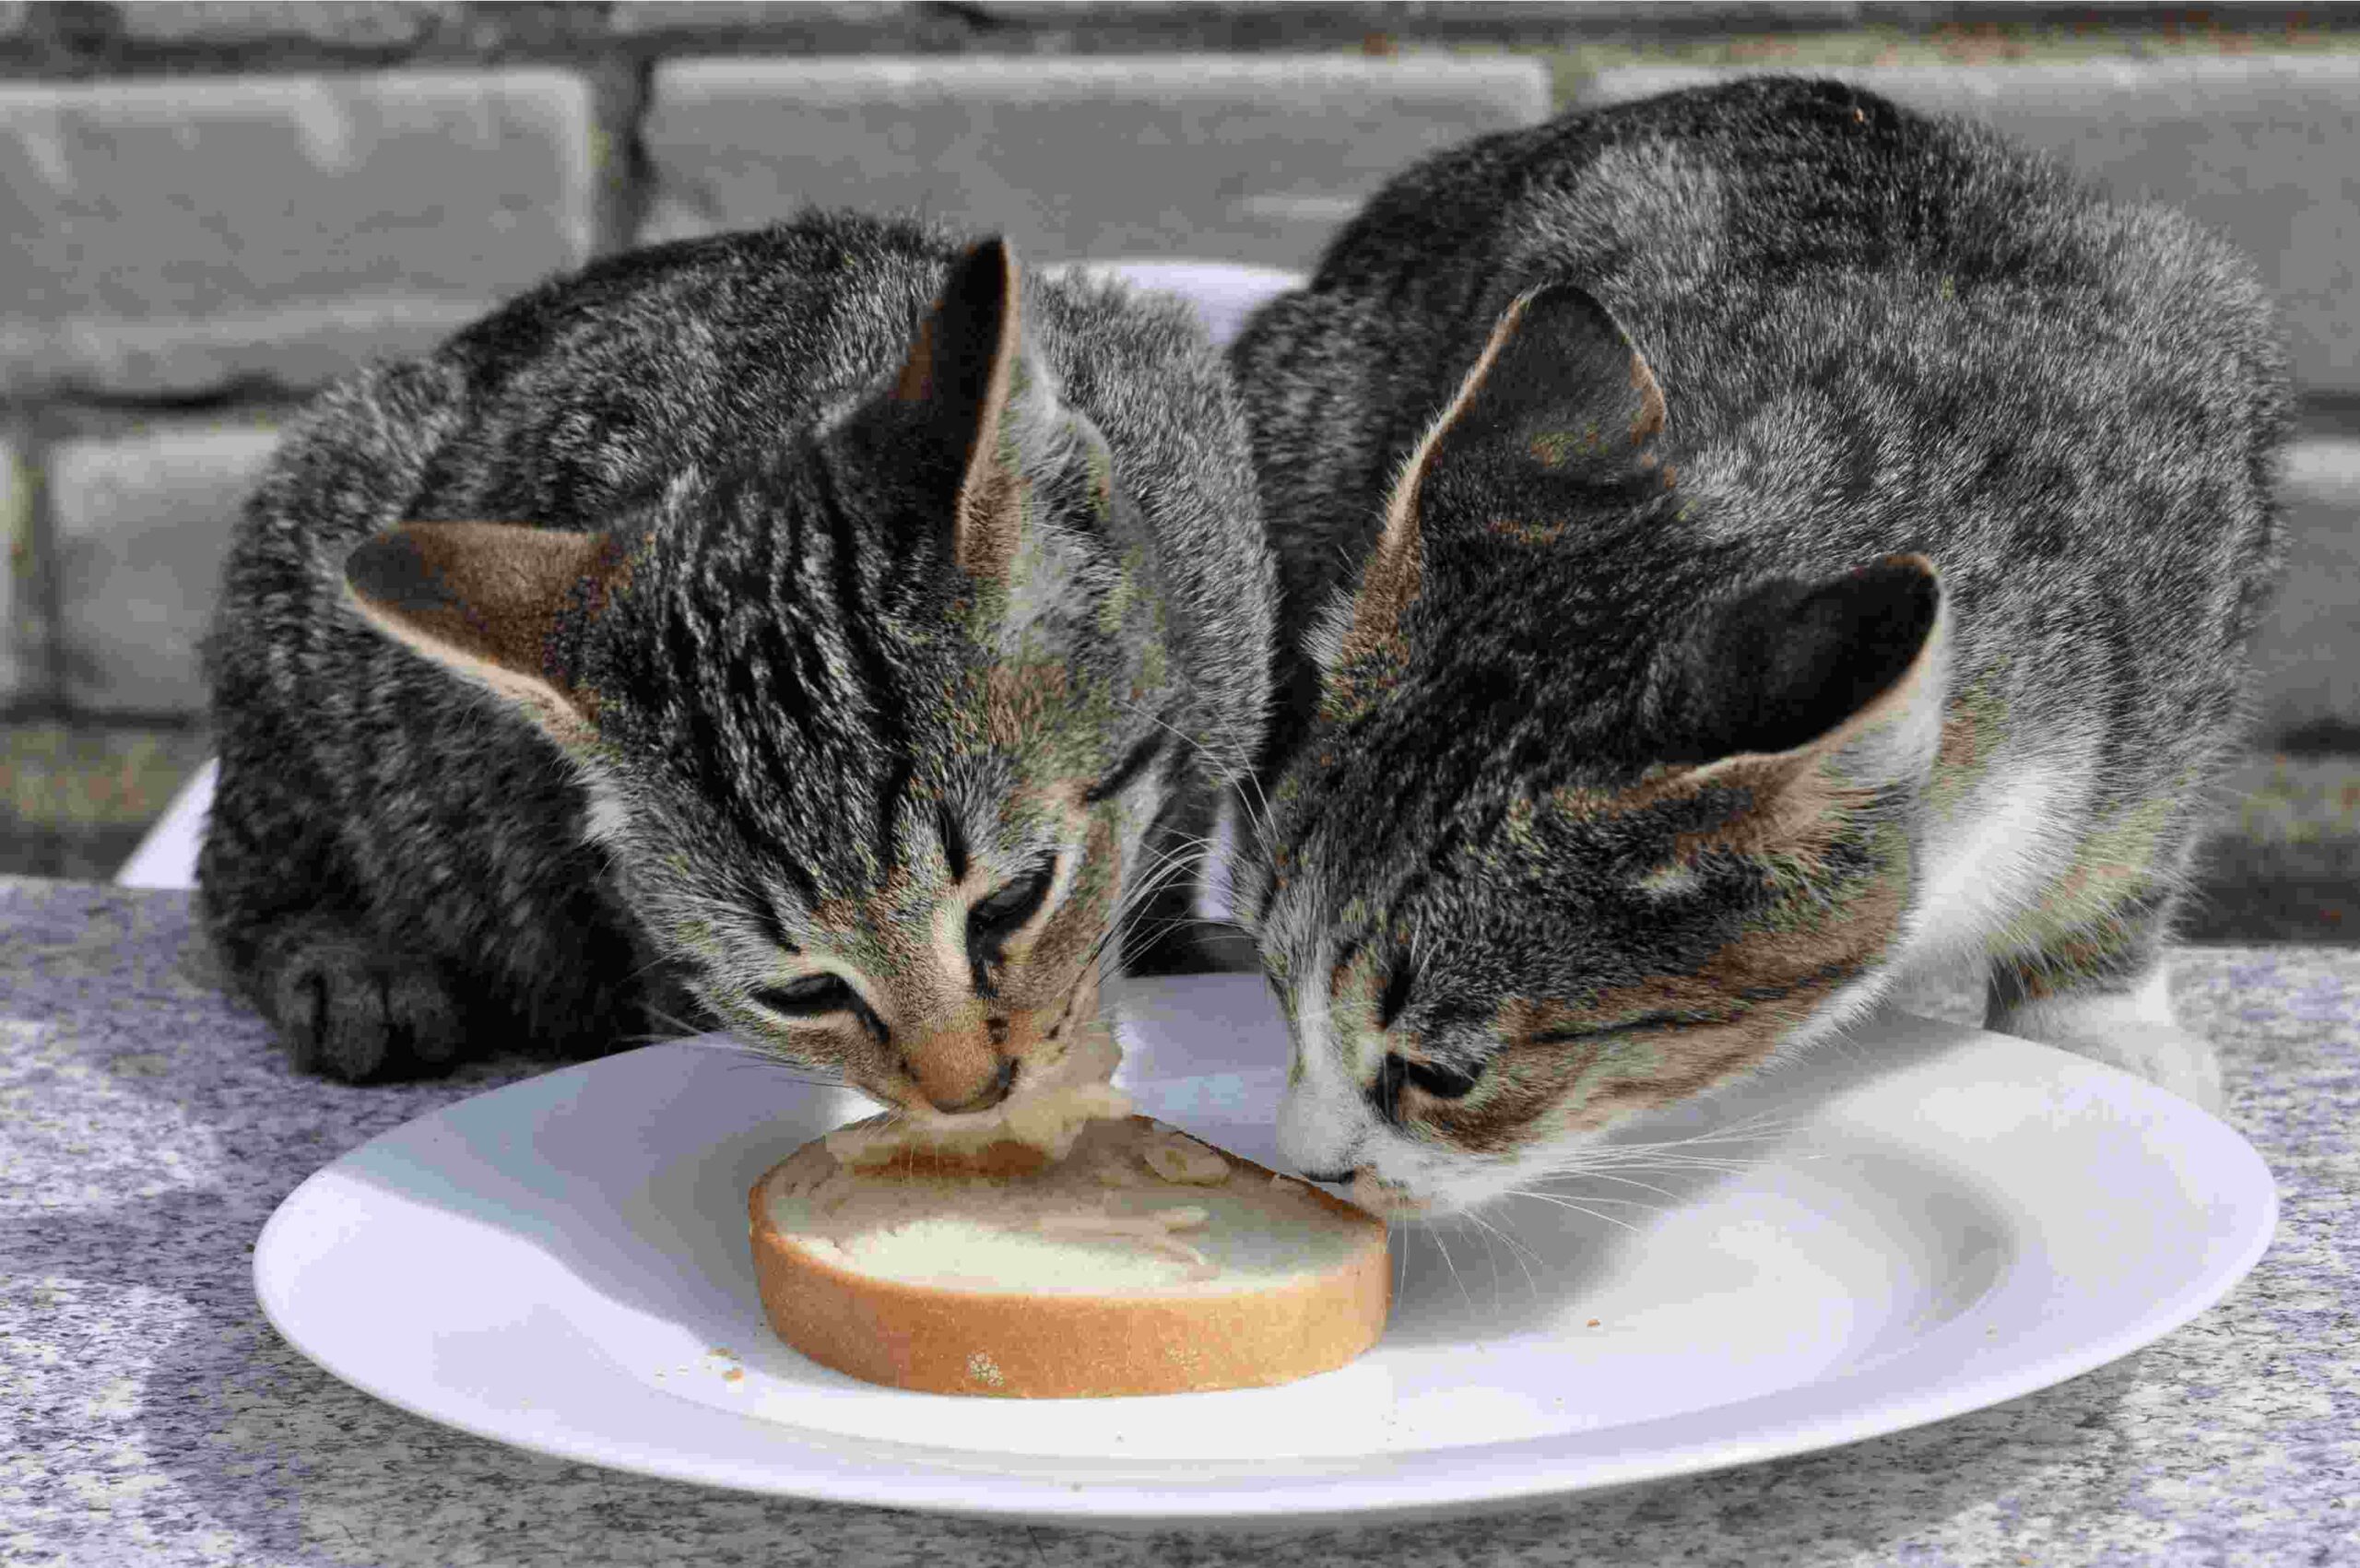 can cat eat bread?